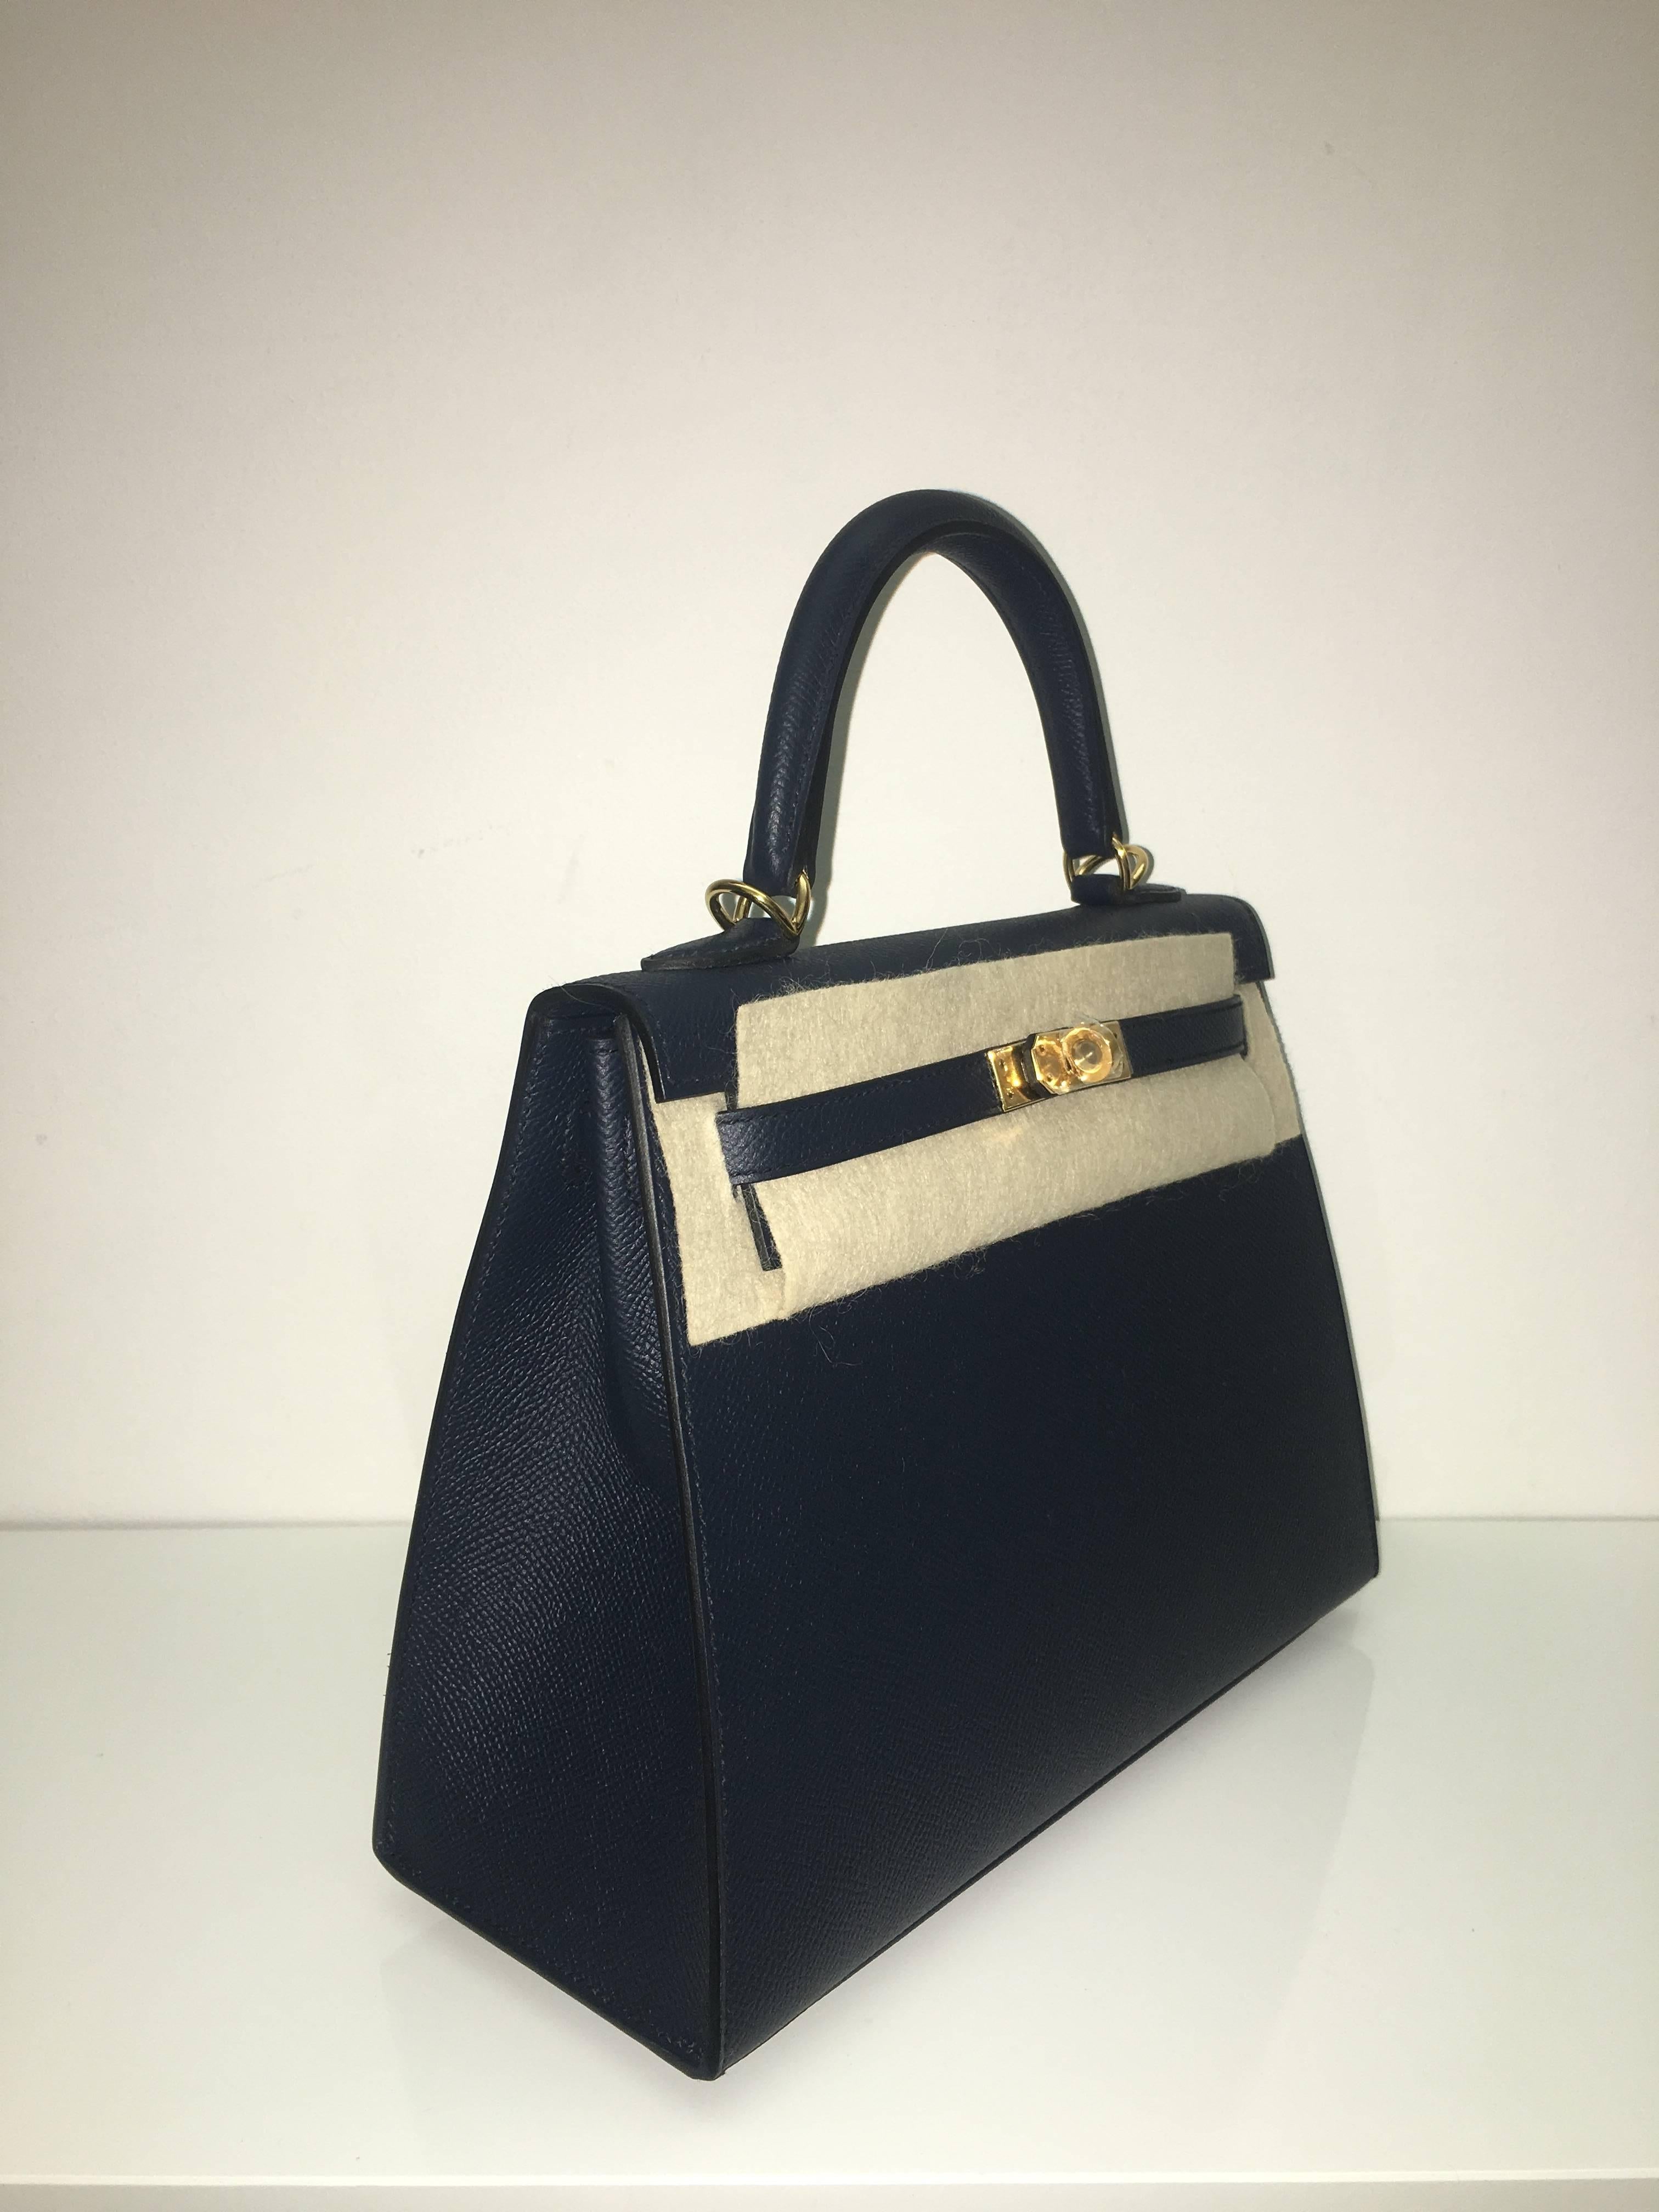 Hermes 
Kelly Size 25
Epsom Leather 
Colour Blue Indigo
Gold Hardware 
store fresh, comes with receipt and full set (dust bag, box...) 
Hydeparkfashion specializes in sourcing and delivering authentic luxury handbags, mainly Hermes, to client